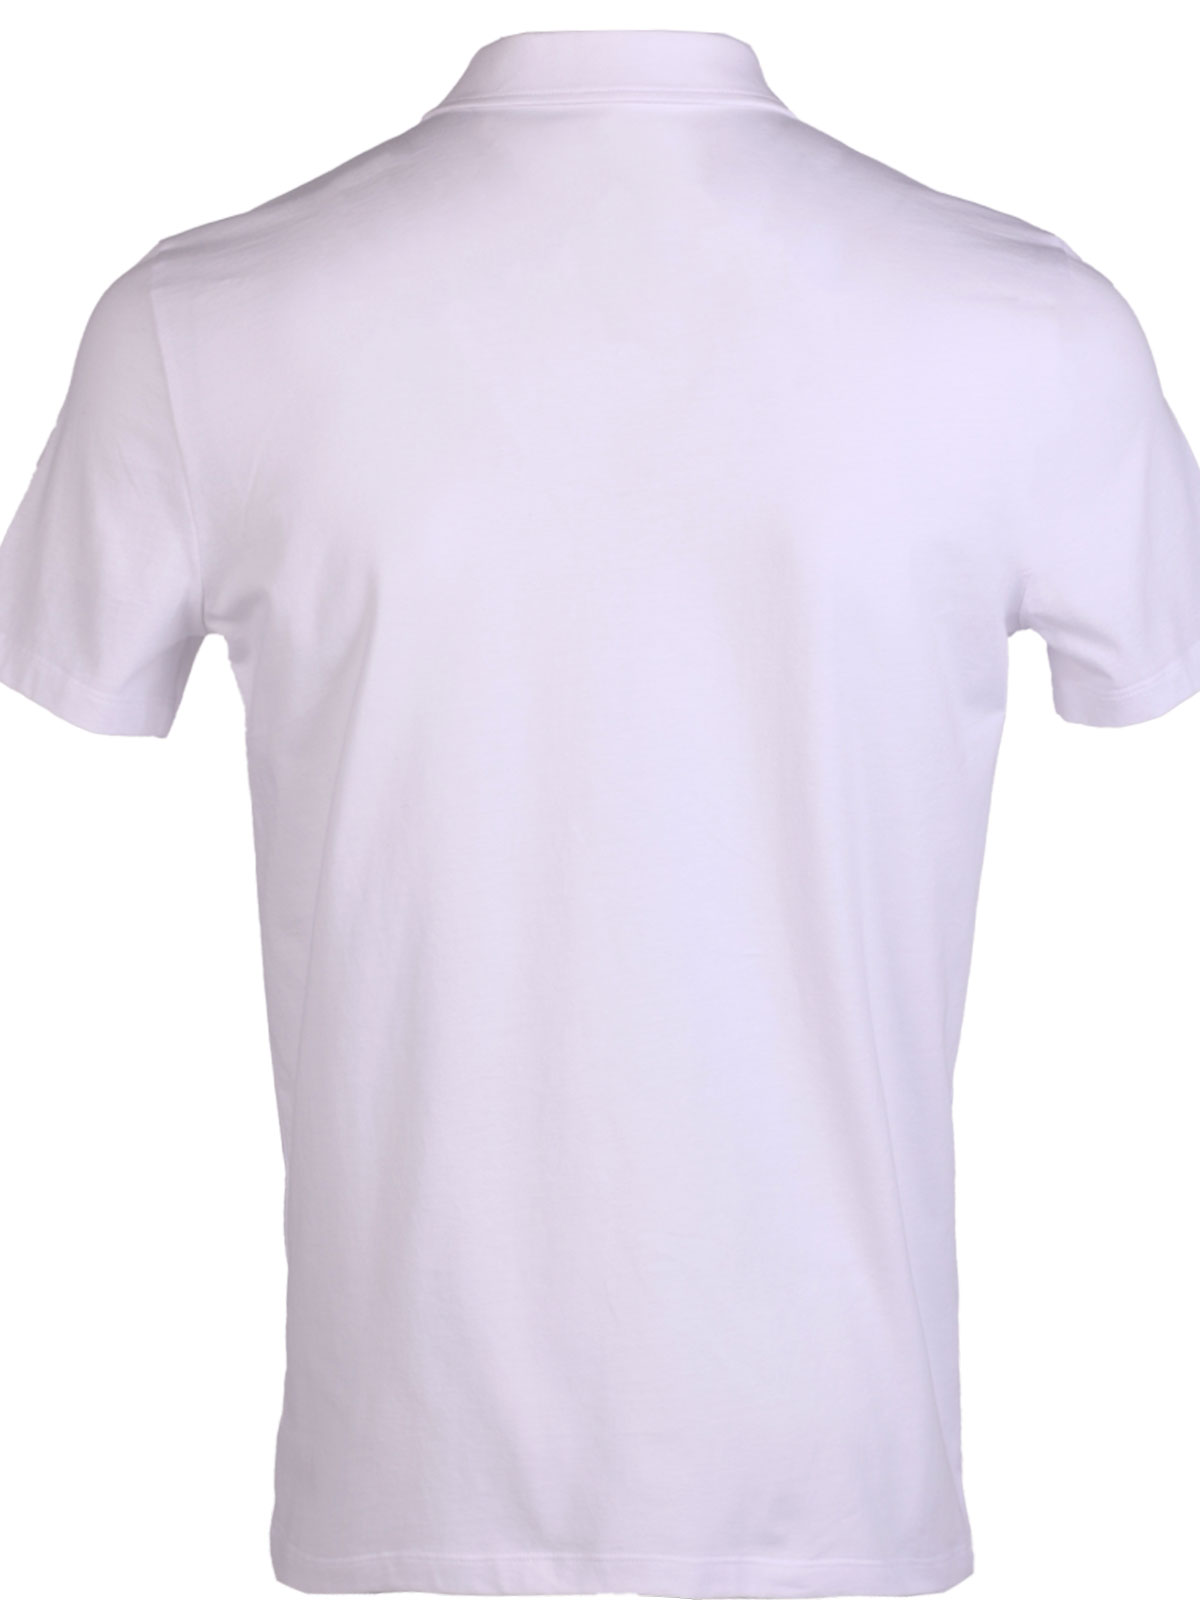 Tshirt in white with a collar - 94416 € 33.18 img2